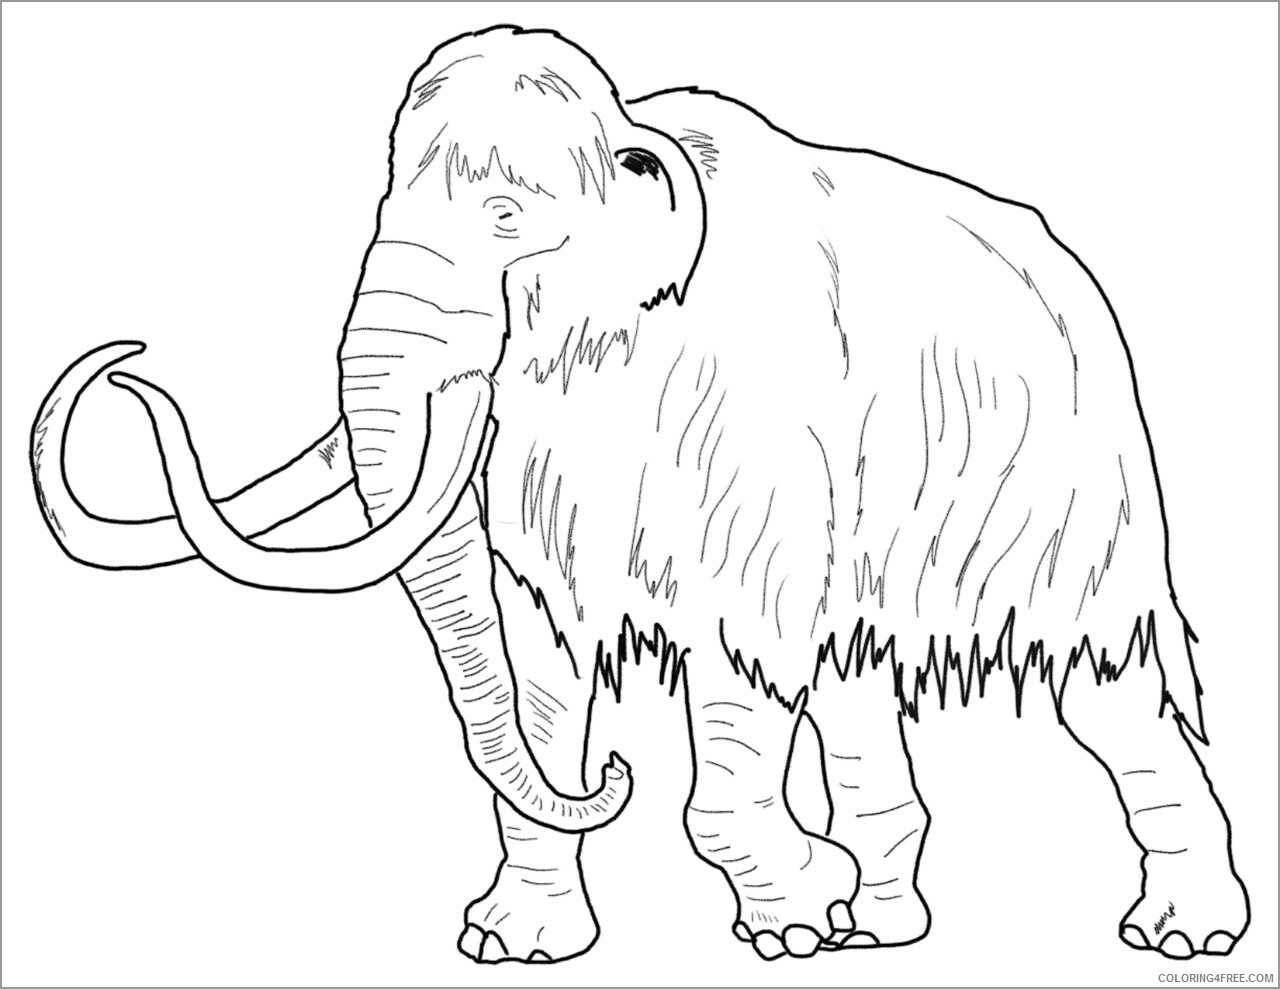 Mammoth Coloring Pages Animal Printable Sheets realistic mammoth 2021 3270 Coloring4free